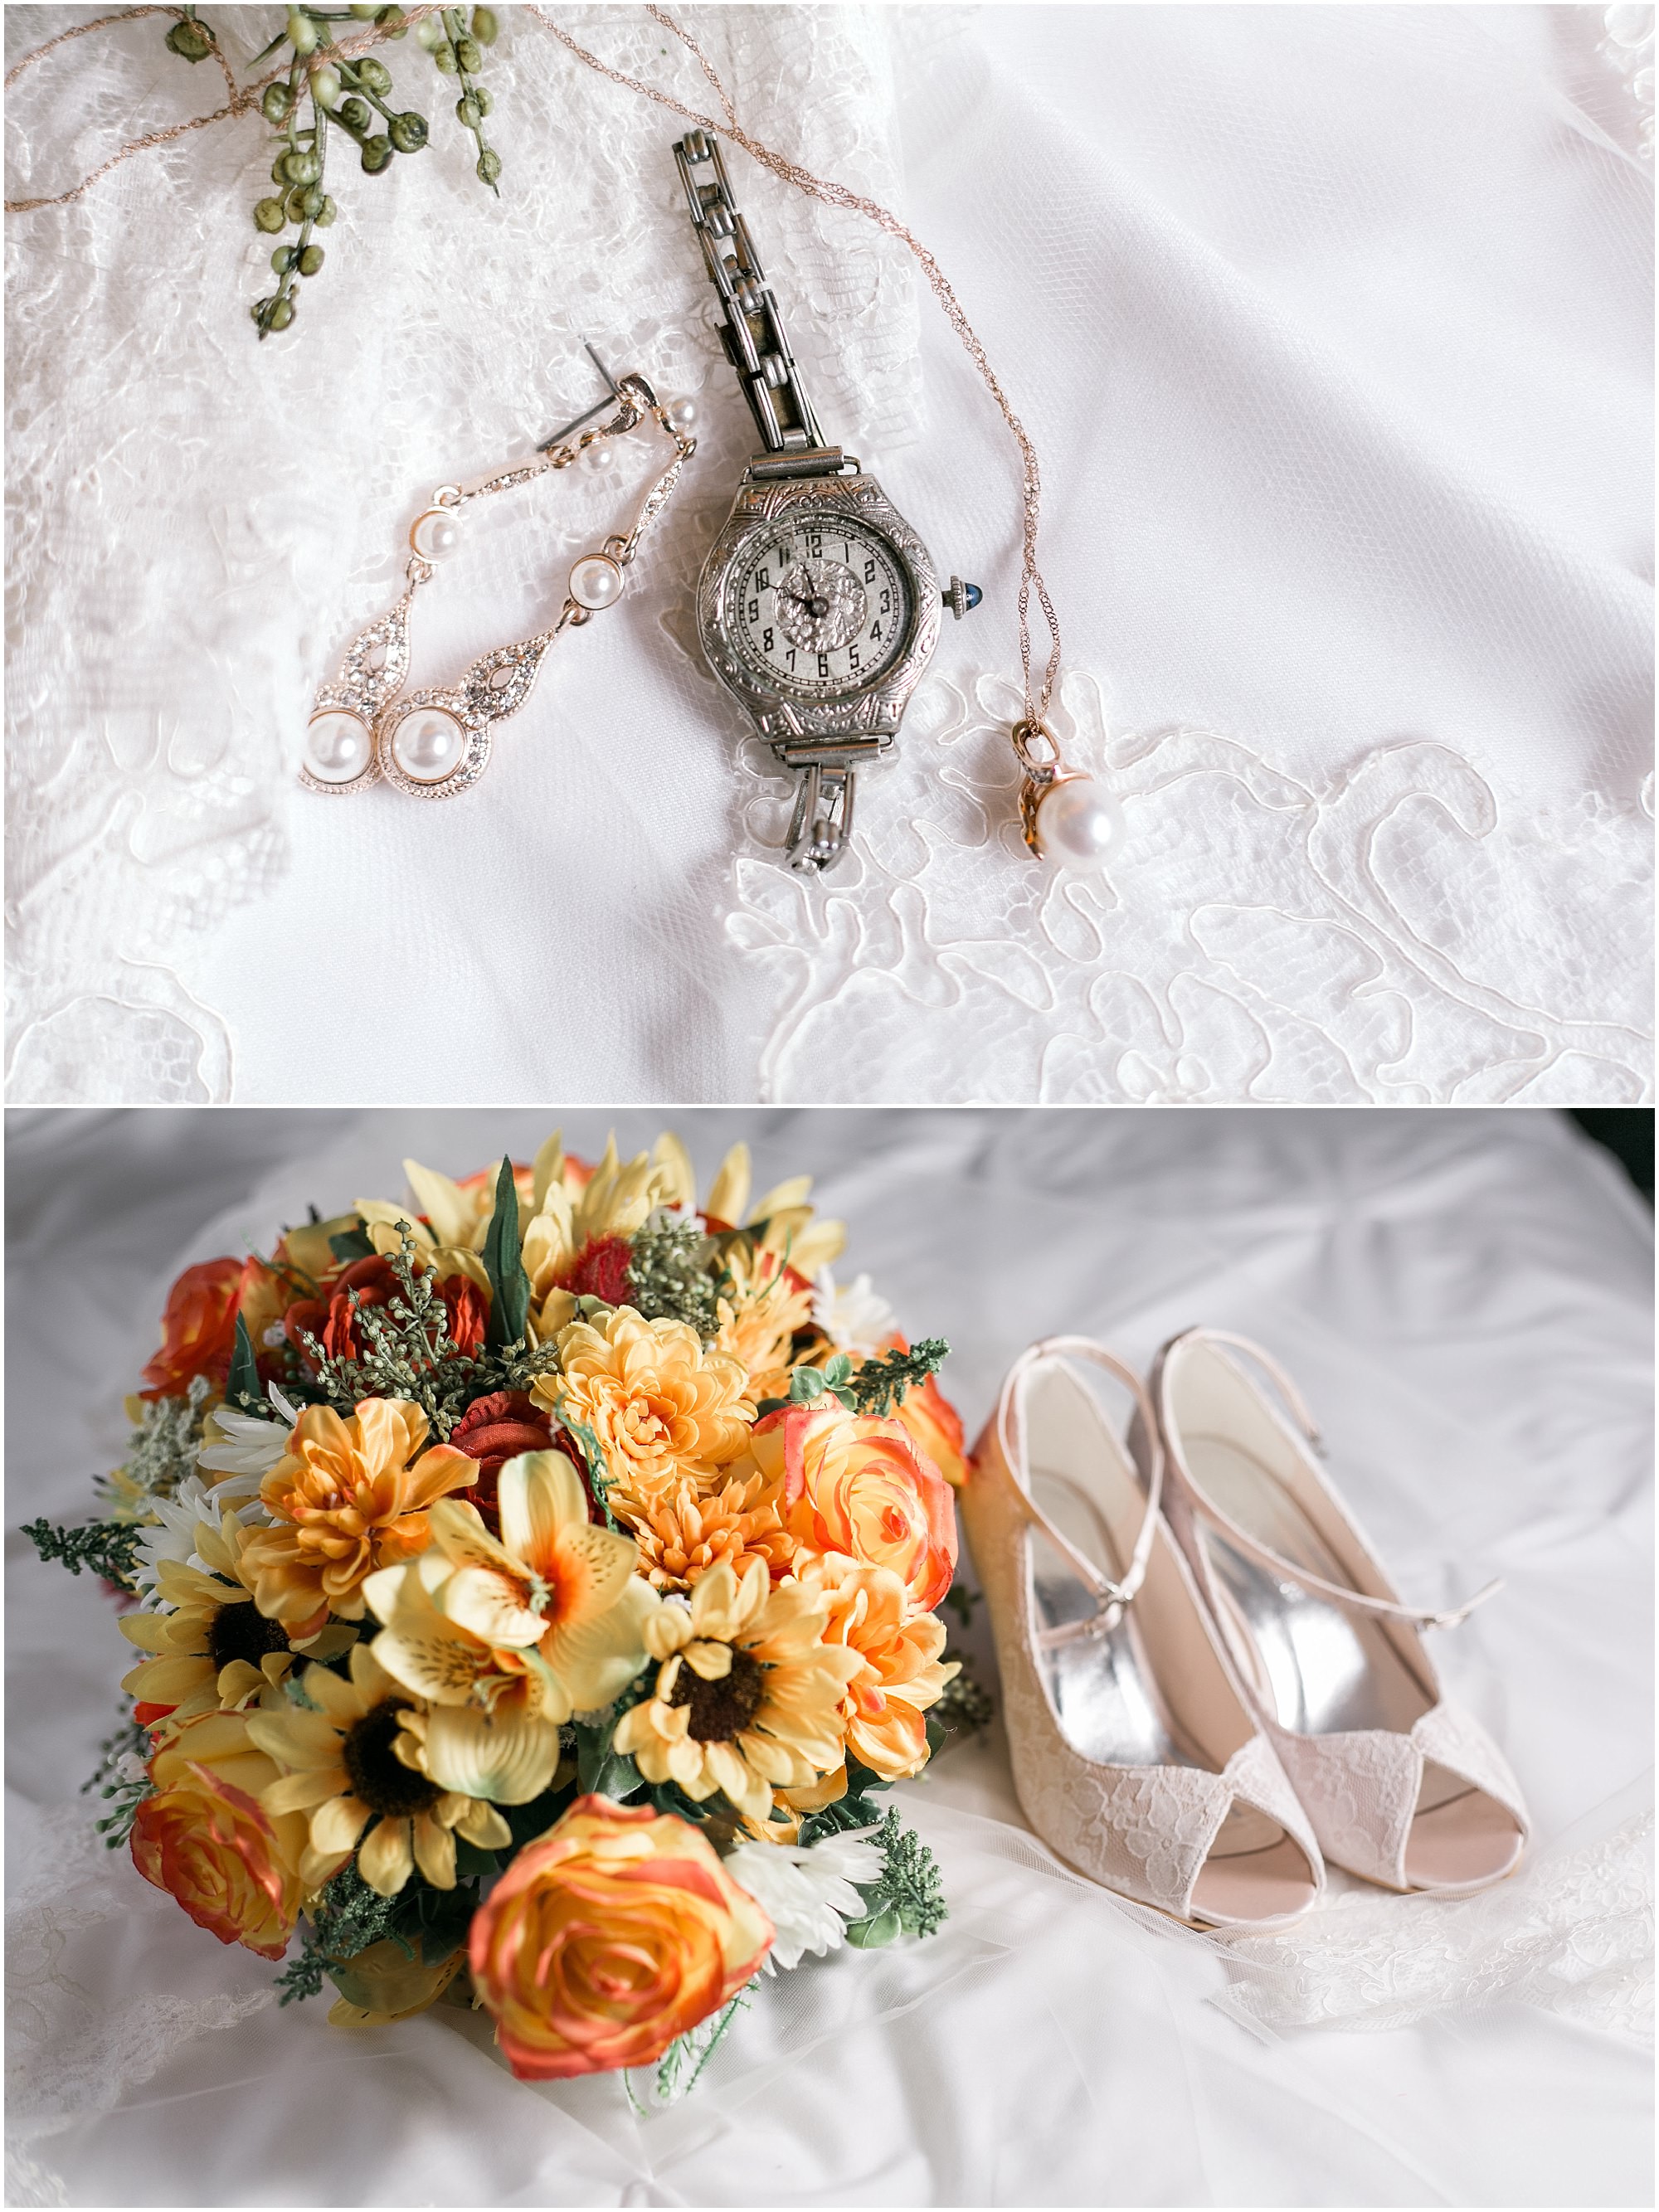 Wedding accessories like a watch, other jewelry, a yellow bouquet and shoes. 